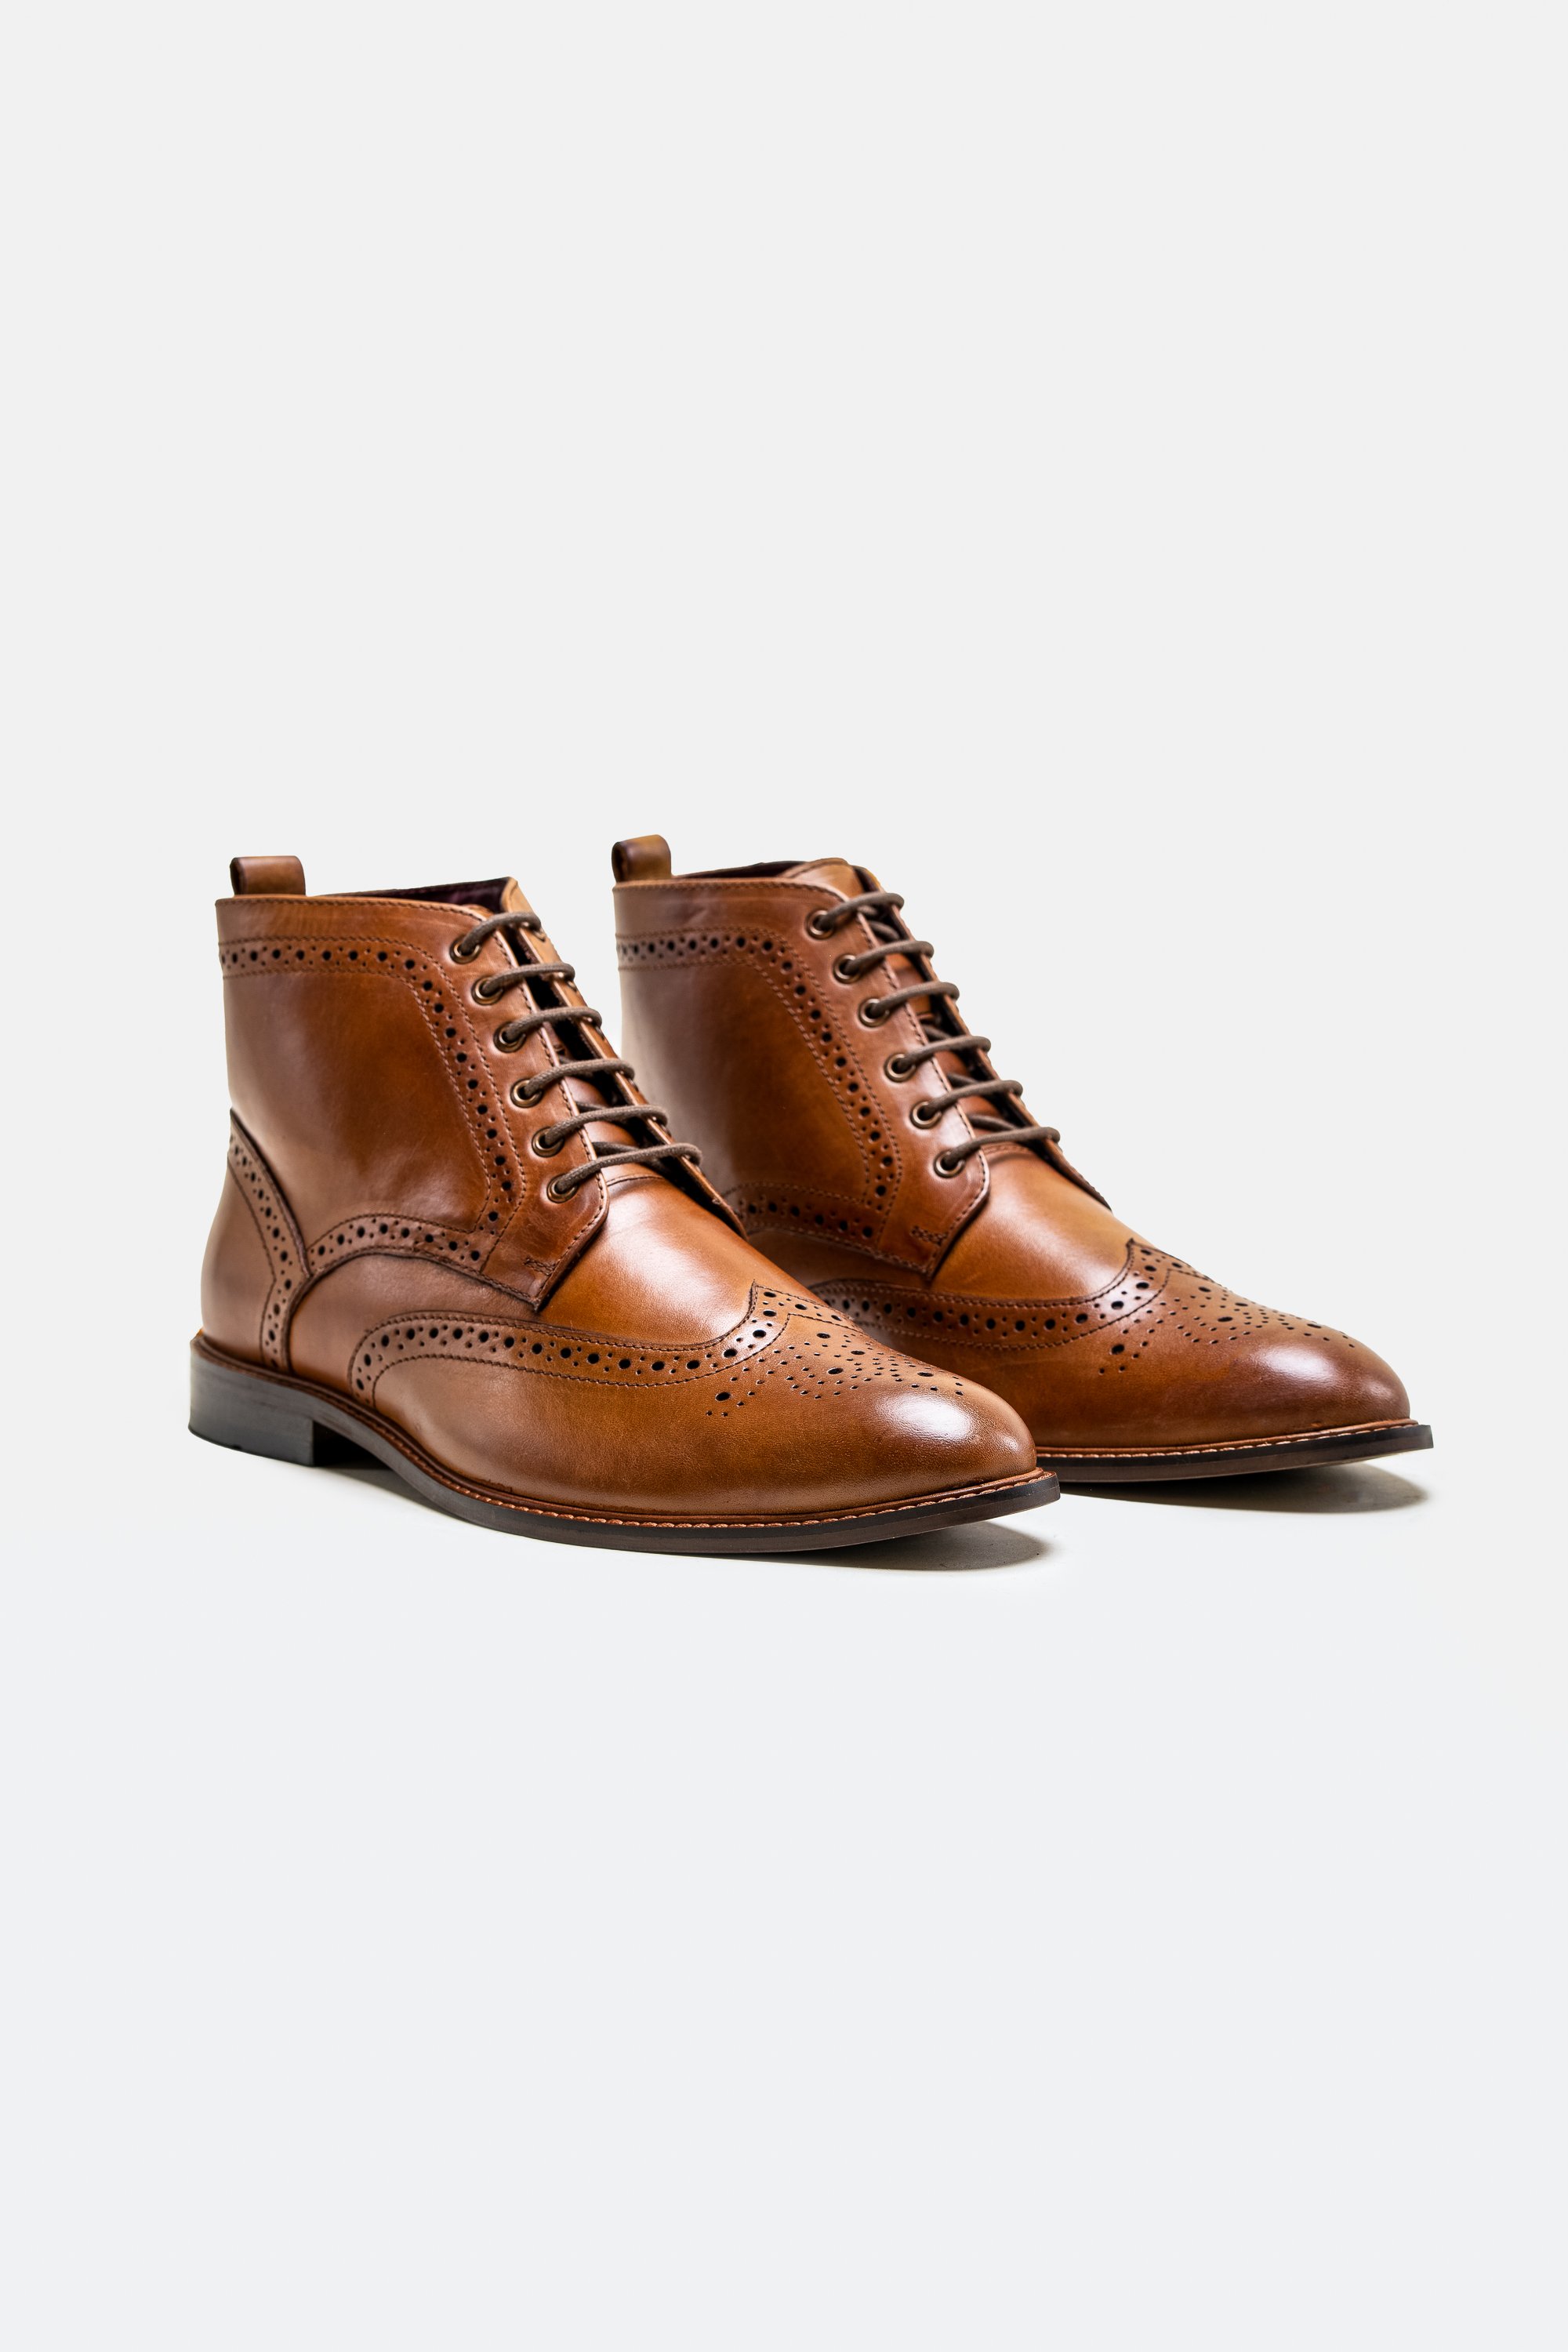 Men's Leather Lace up Brogue Boots - HOLMES